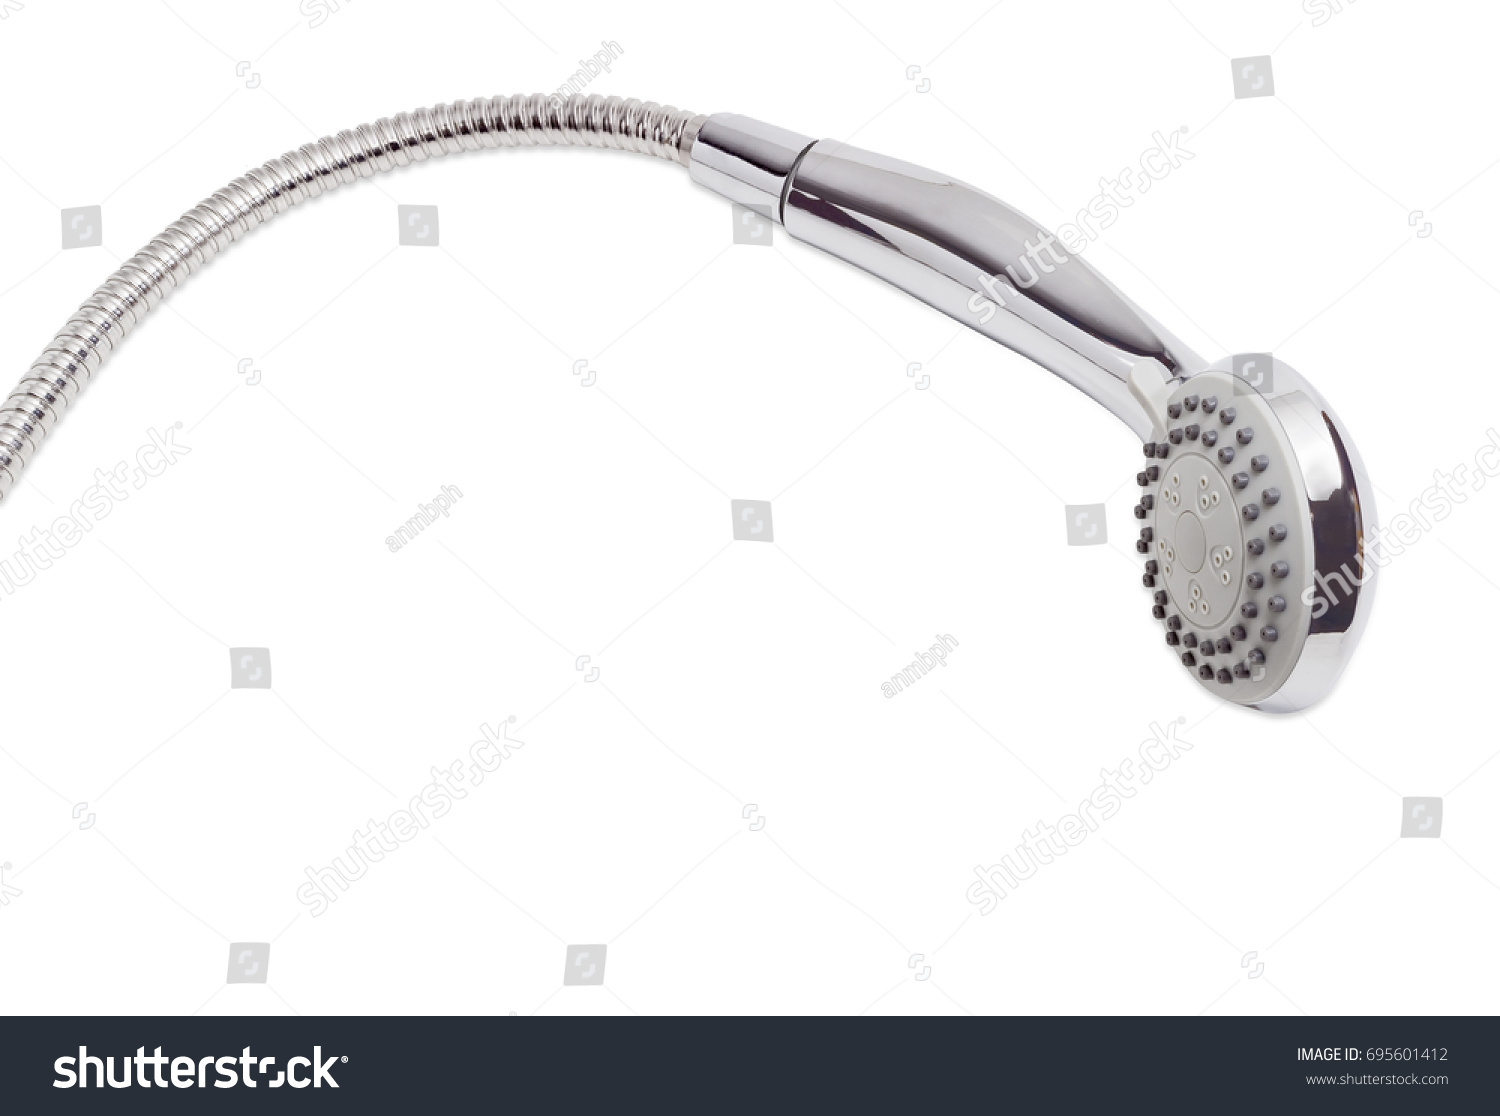 Eco shower head with the turn lever of a spray settings and metal shower hose on a white background
 #695601412